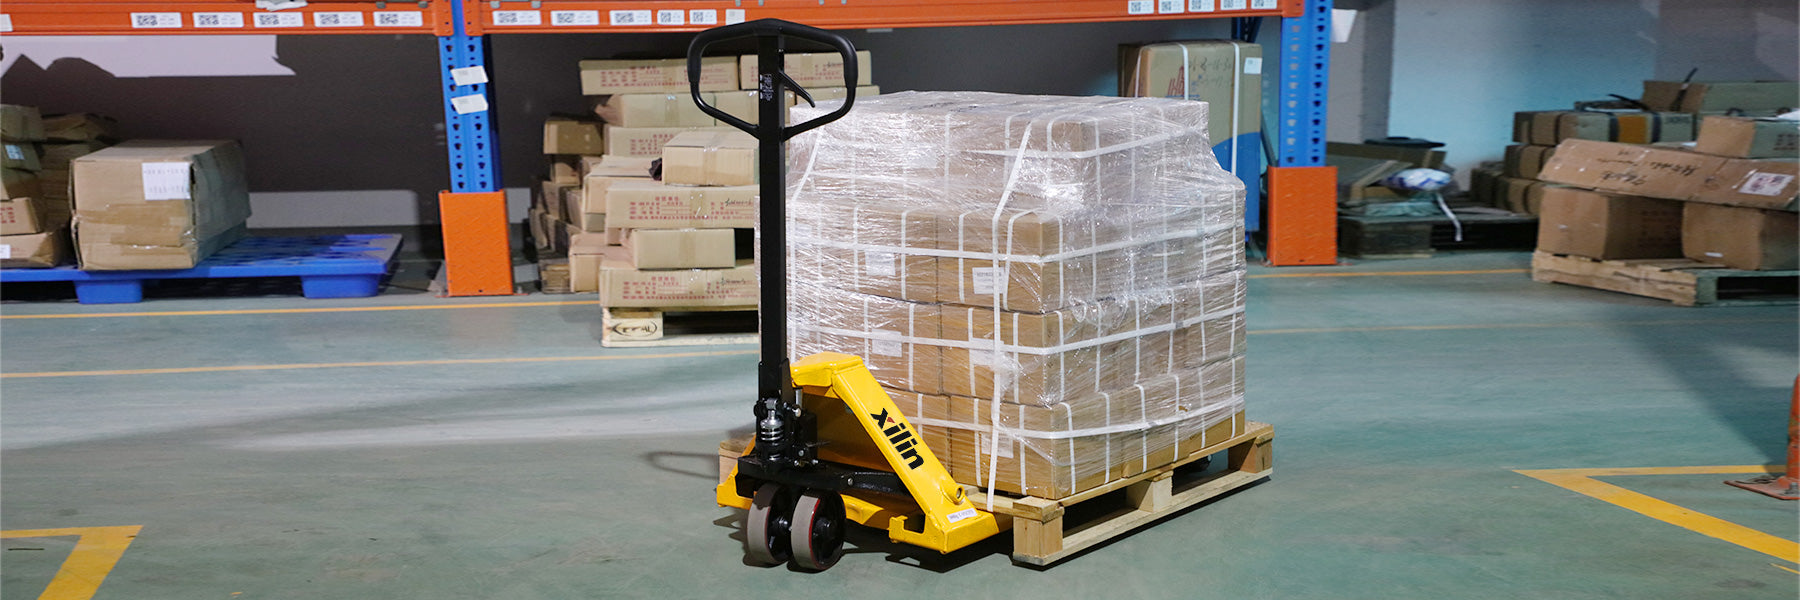 How to safely operate a pallet Jack?